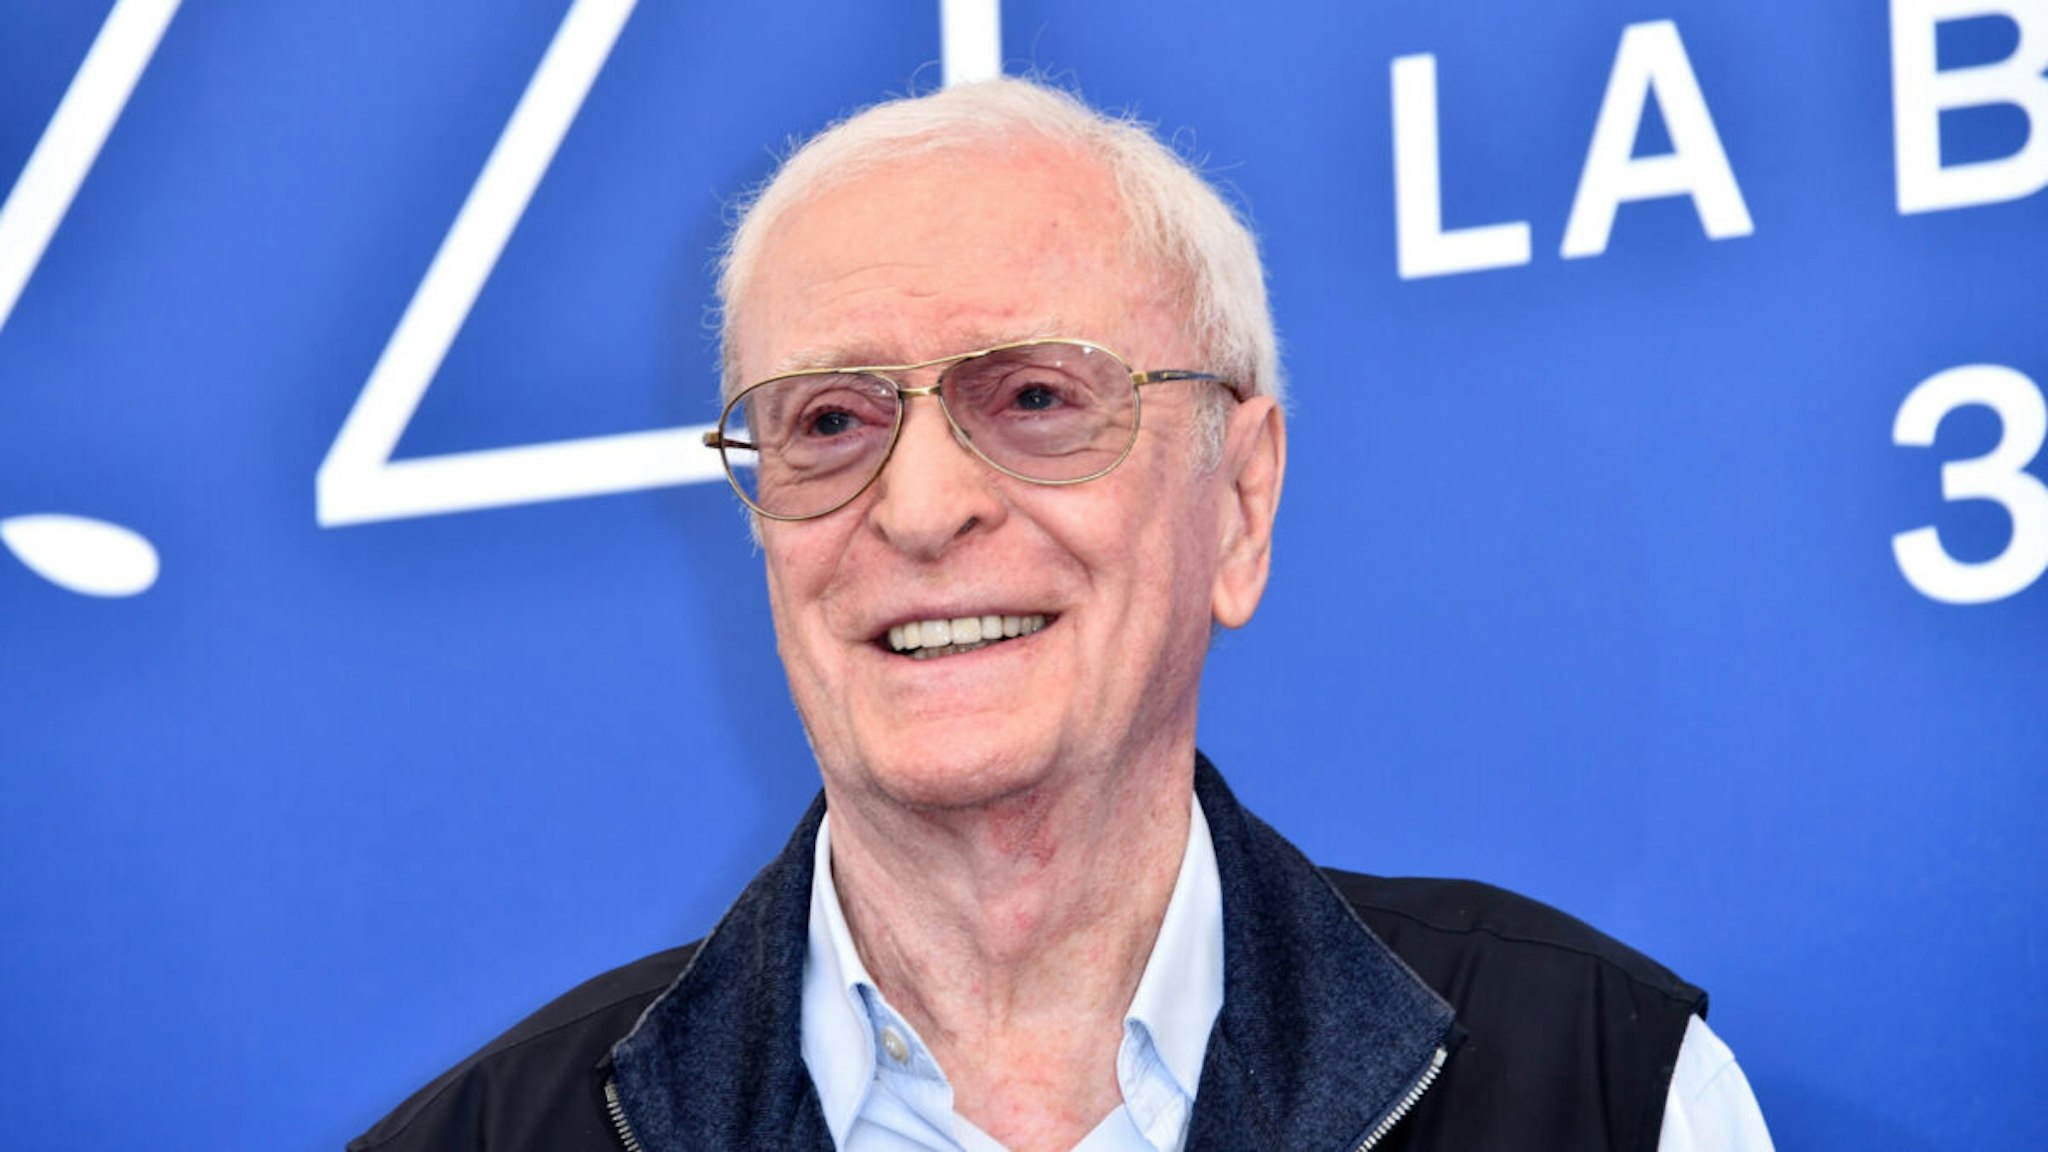 Michael Caine attends the 'My Generation' photocall during the 74th Venice Film Festival at Sala Casino on September 5, 2017 in Venice, Italy.